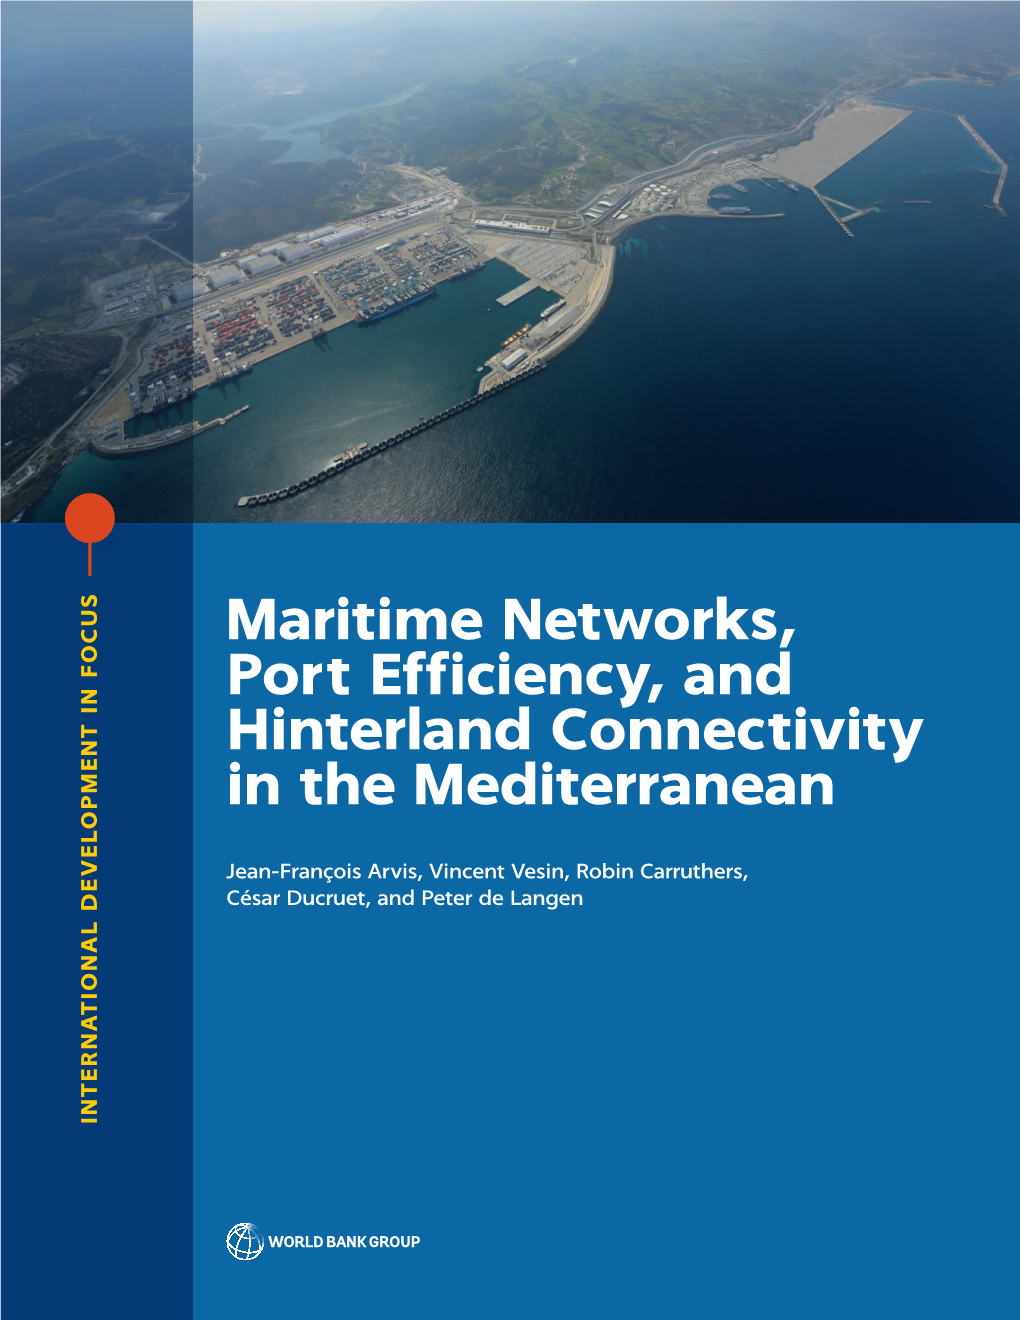 English Channel and the North Sea, the Black Sea, and Many Middle Eastern Ports Are Closely Connected to the Mediterranean and Are Included As External Partners